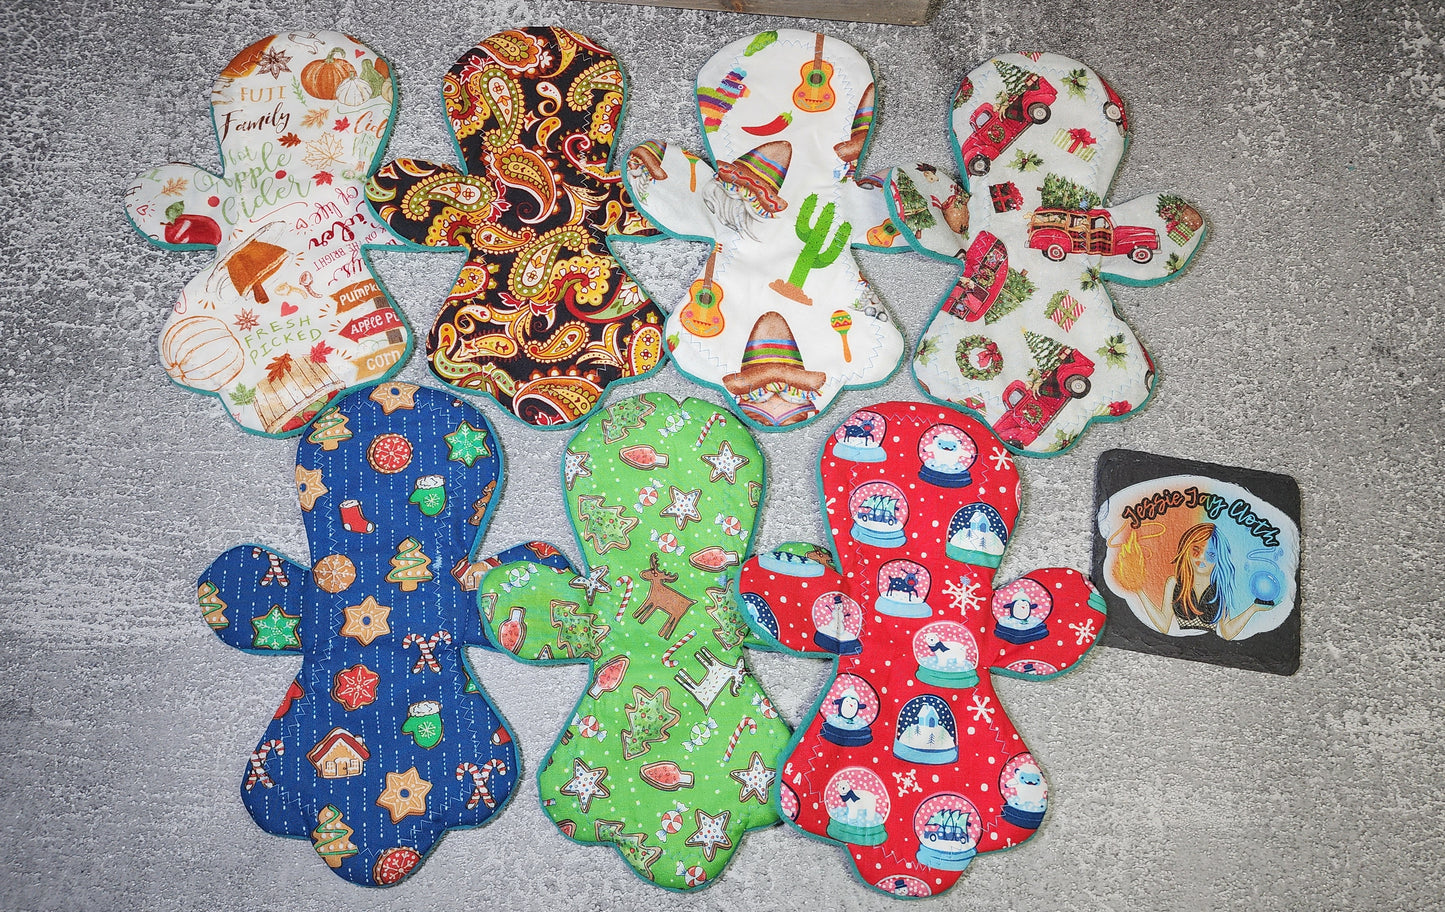 9" Miss Ginger Cloth Pad | Moderate Absorbency | Fall, Autumn Print | 2.75 inch Snapped Width